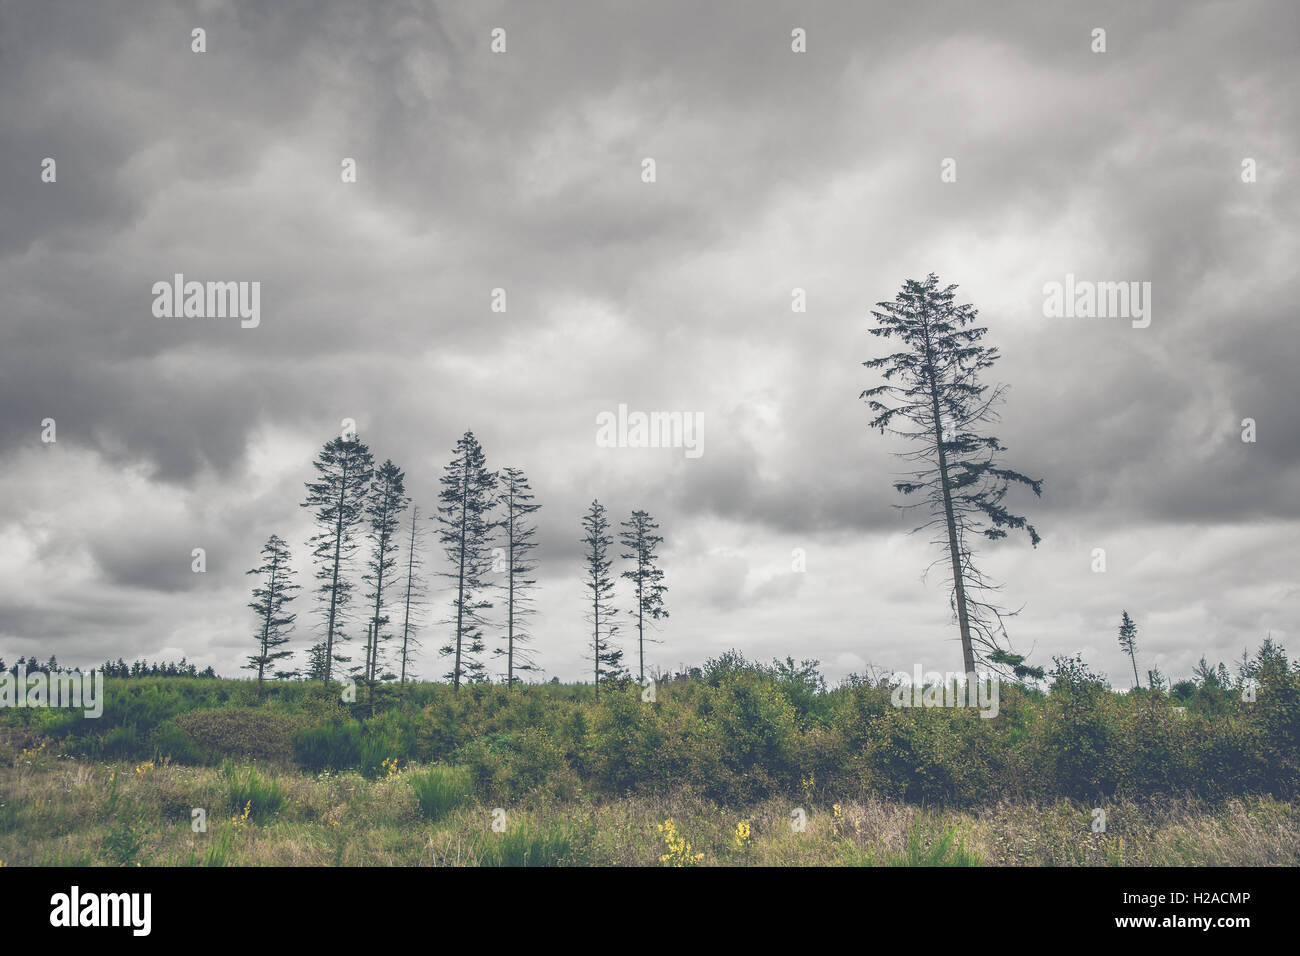 Landscape with tall pine tree silhouettes in dark cloudy weather Stock Photo